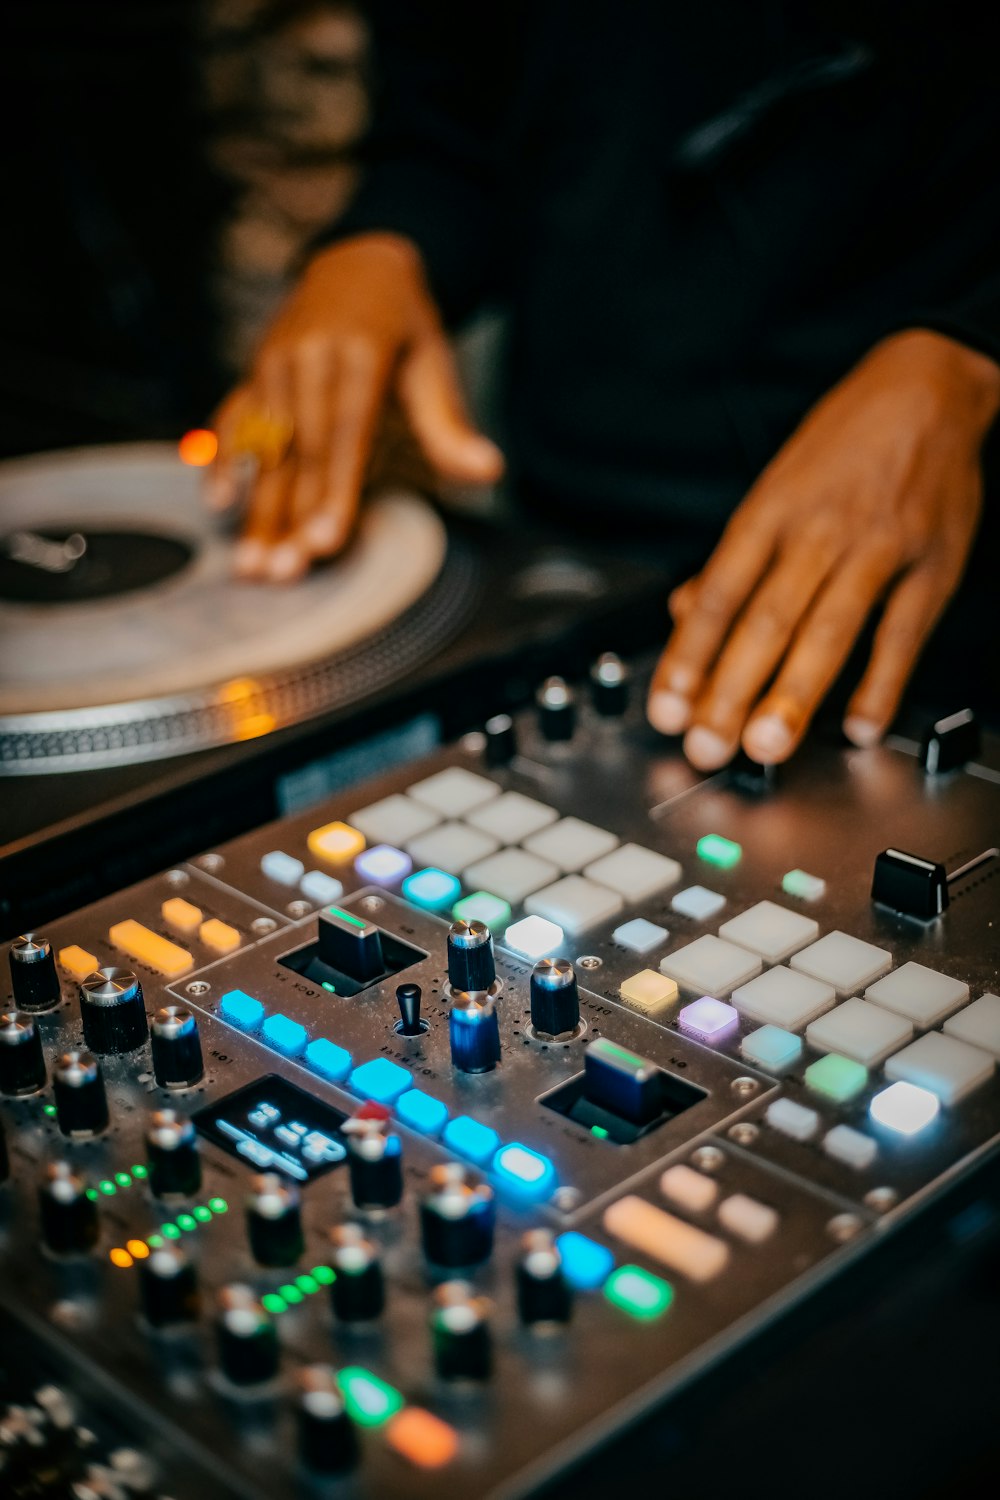 a dj mixer with a hand on the turntable